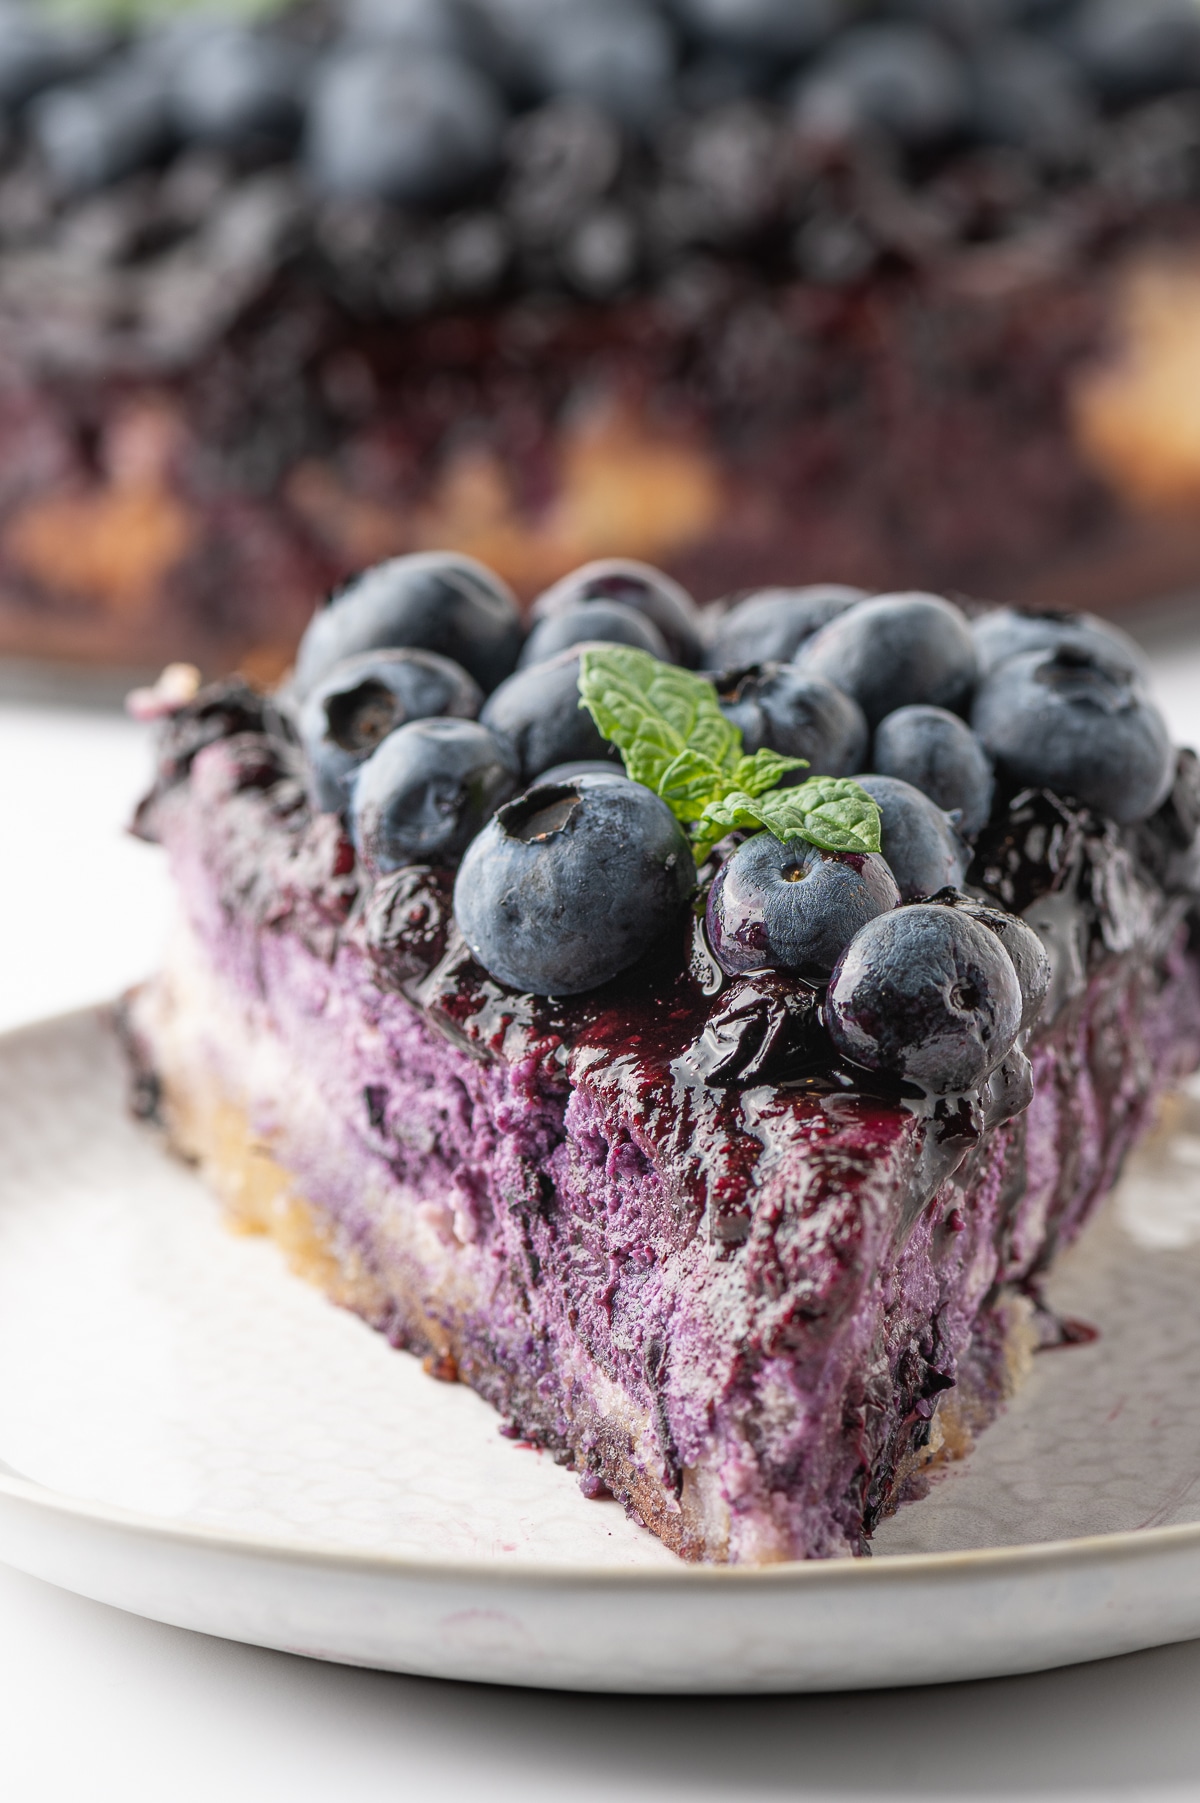 An up close photo of a piece of bright violet colored cheesecake topped with blueberry drizzle, fresh big bright blueberries and a sprig of bright green mint